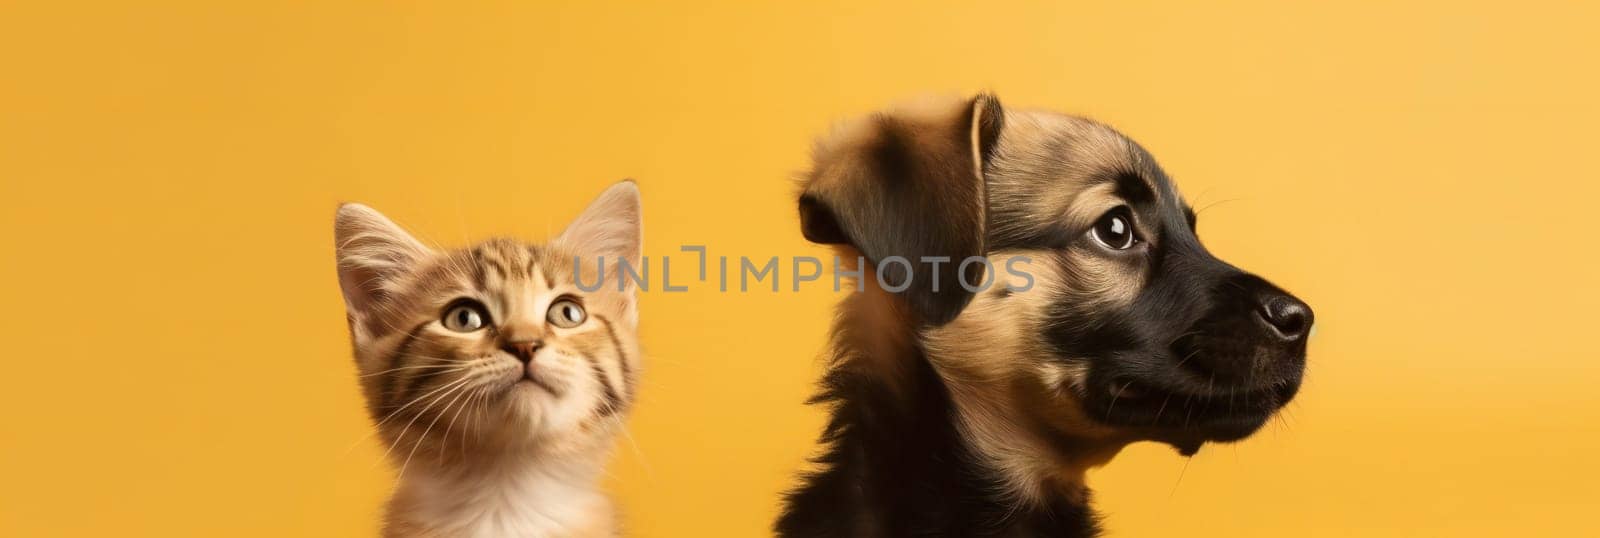 Cute puppy and kitten on yellow background, space for text. Banner design